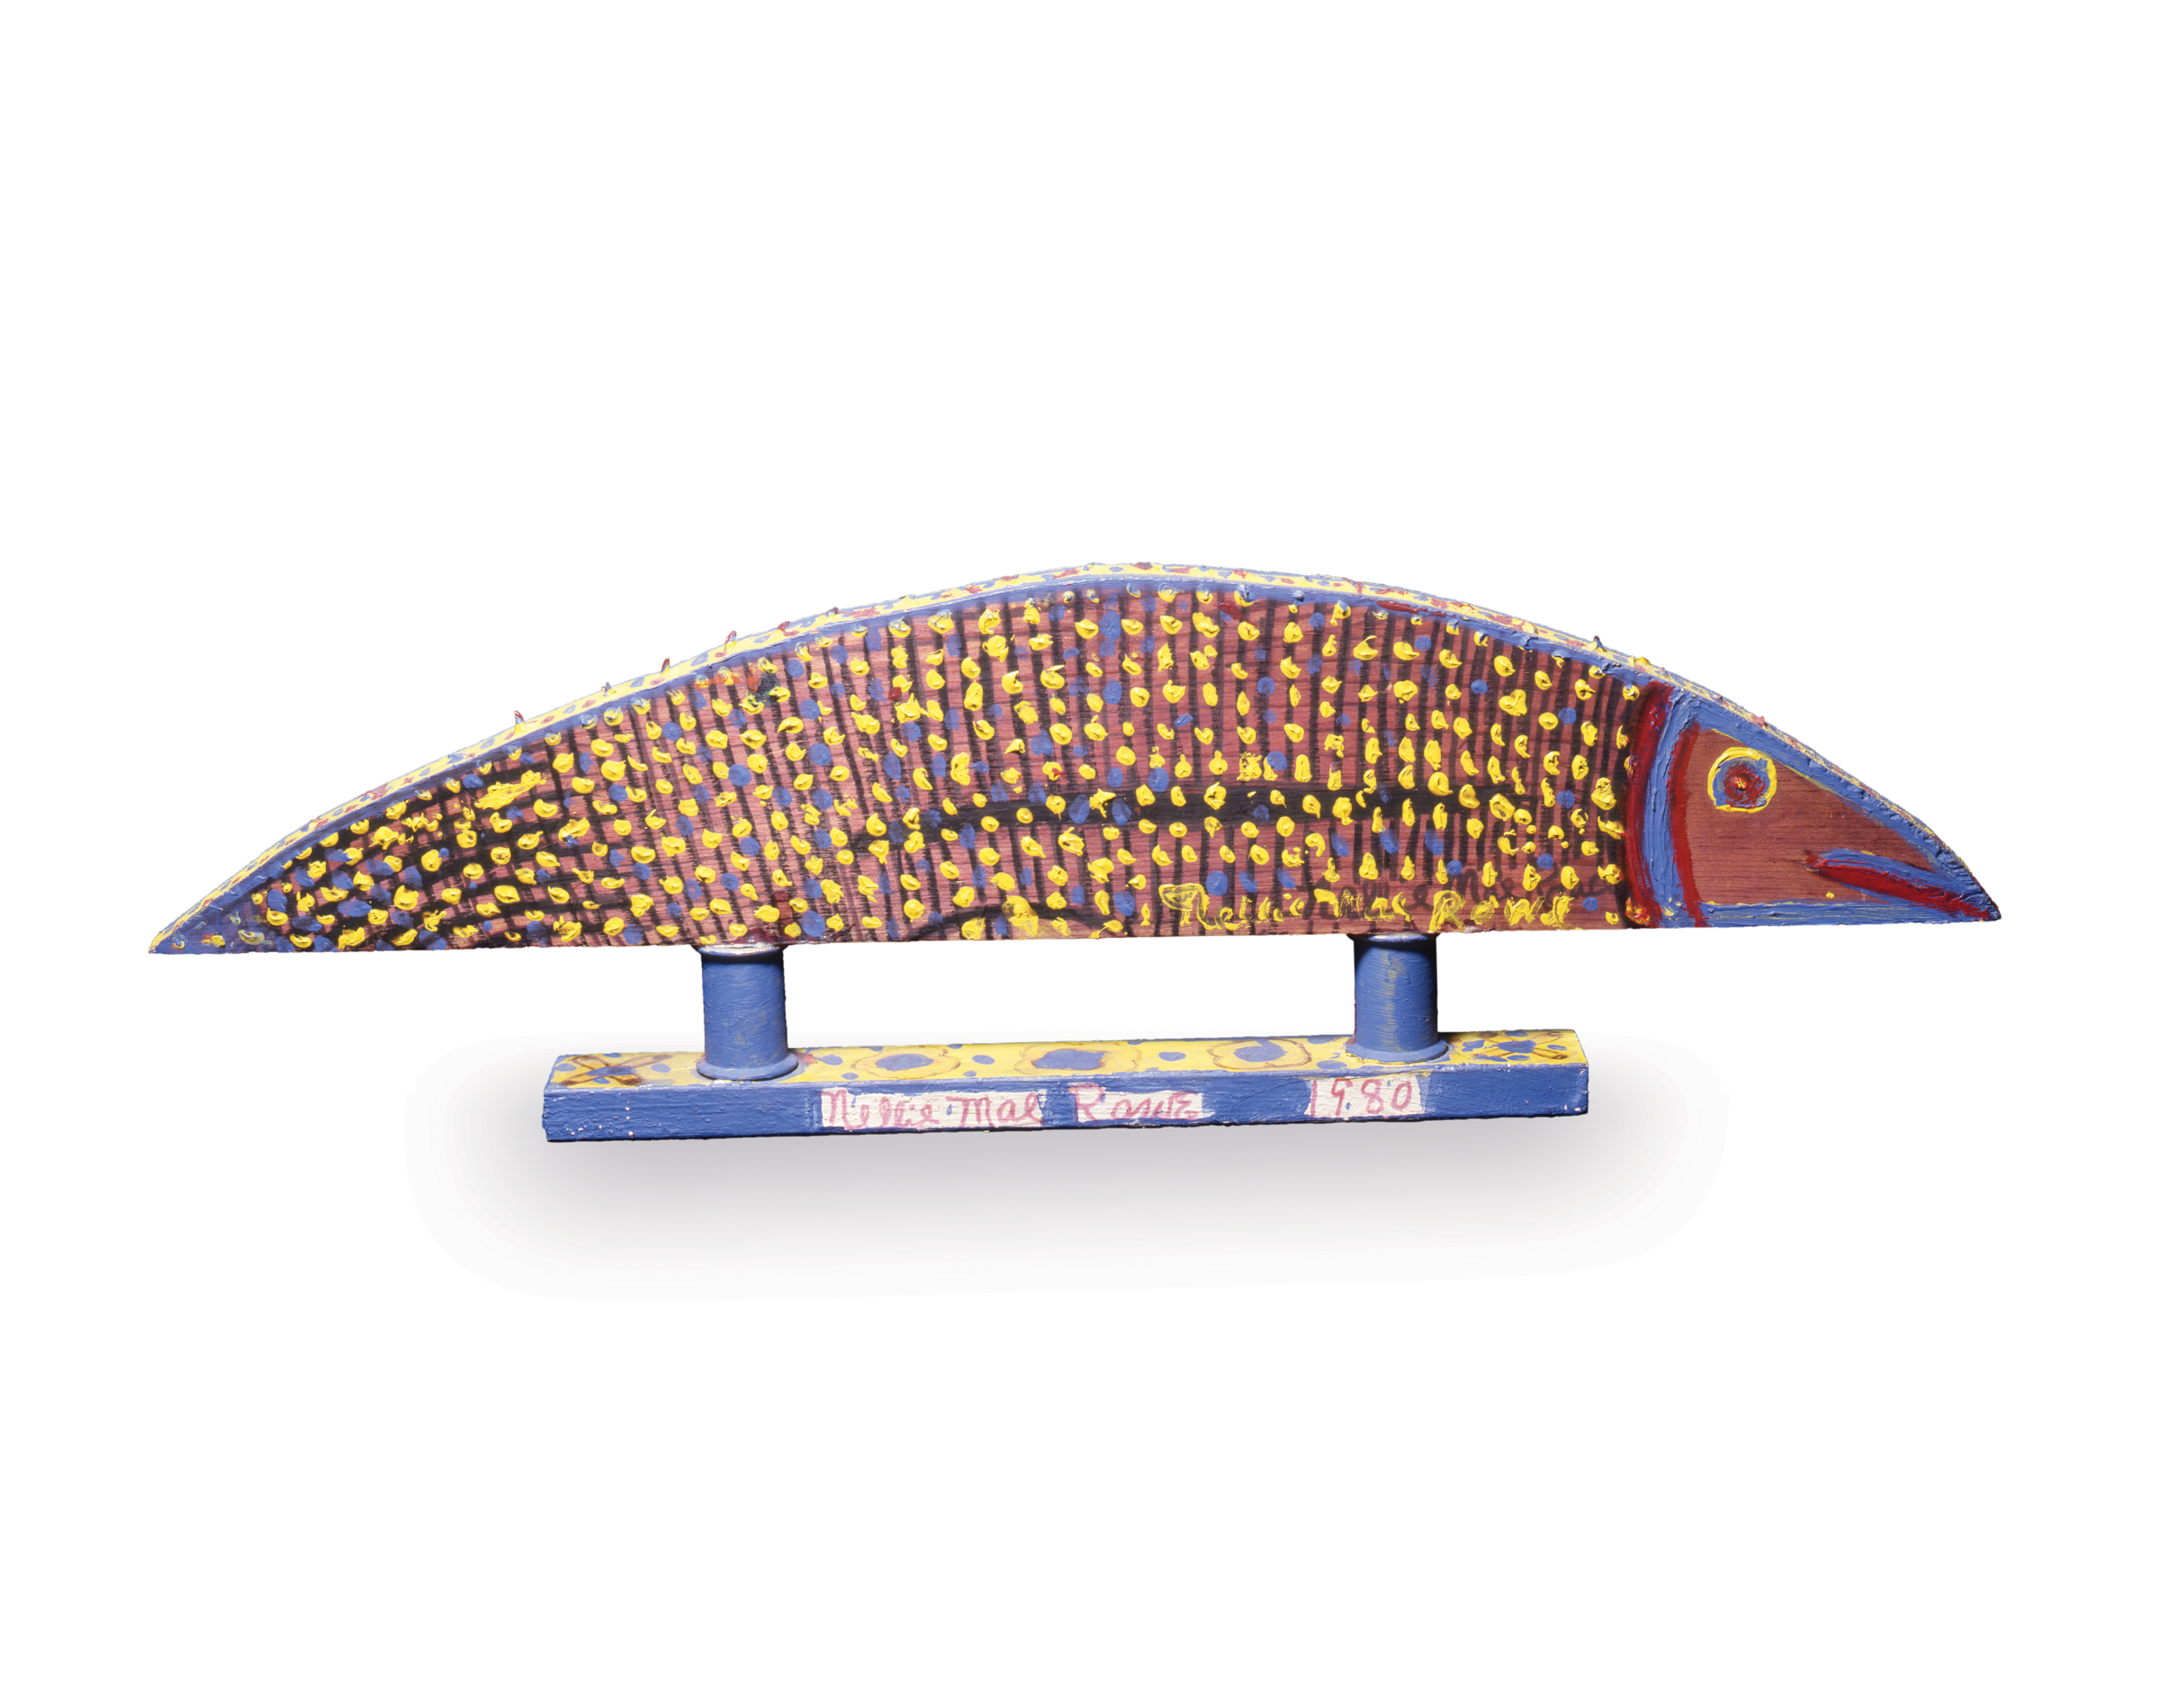 Wooden sculpture of fish with straight, flat bottom and smooth, sloped top painted red and black with yellow and blue dots; two short pillars attach fish to blue base.